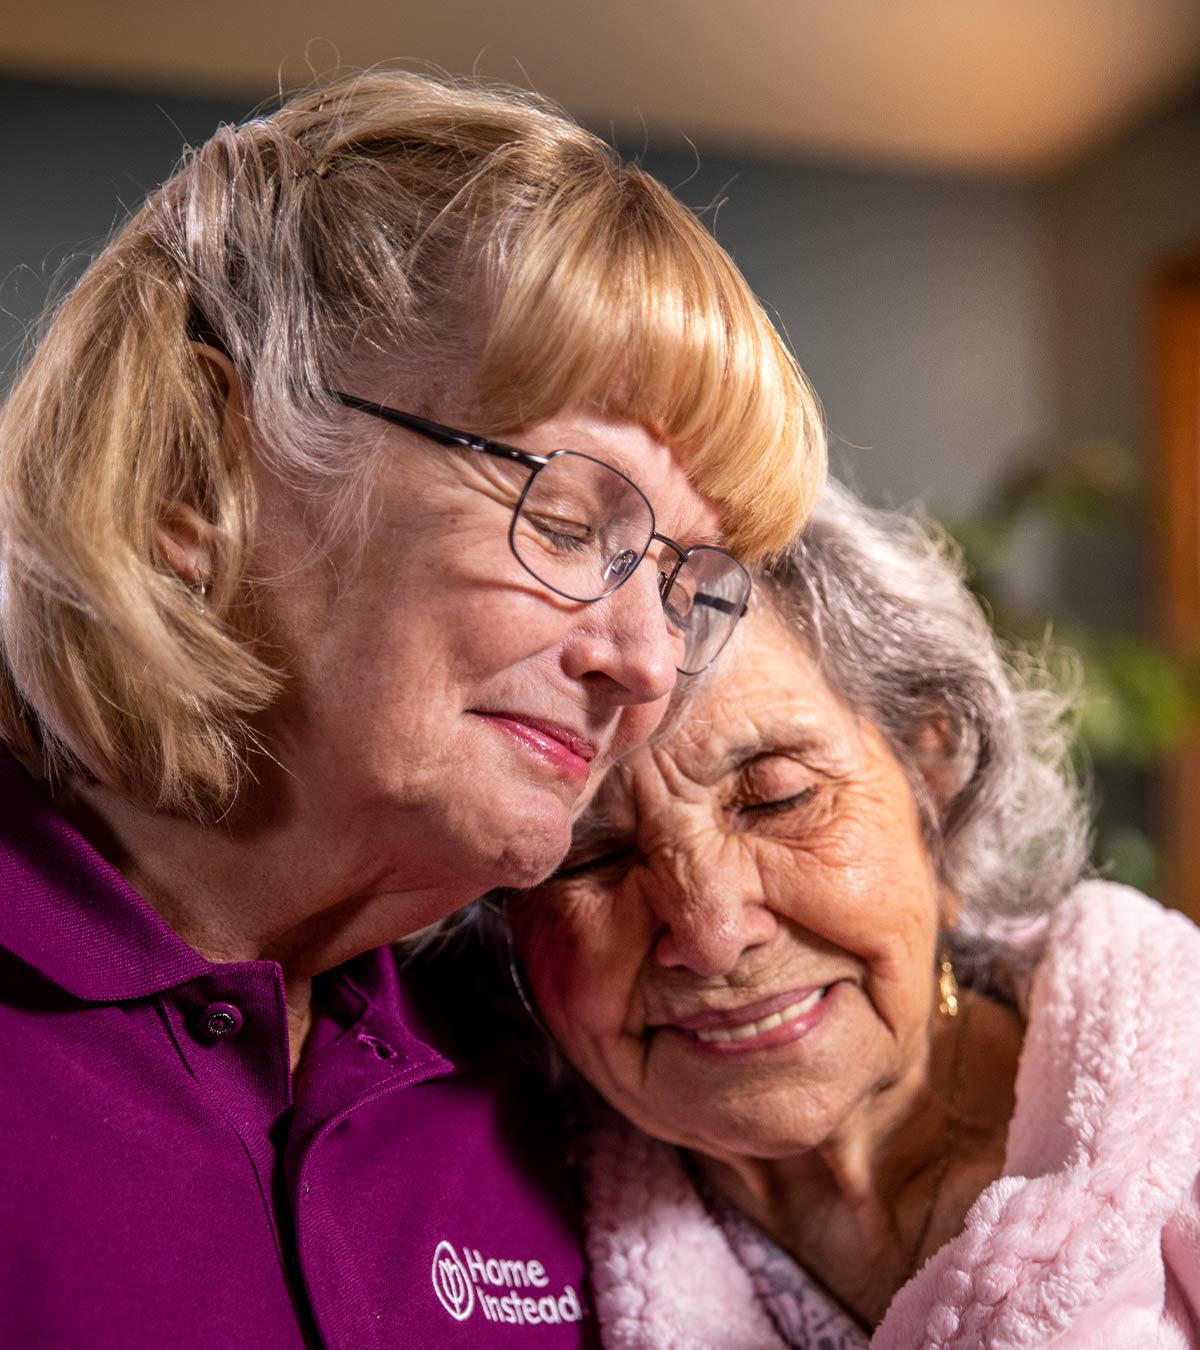 CAREGiver providing in-home senior care services. Home Instead of Trumbull, CT provides Elder Care to aging adults. 